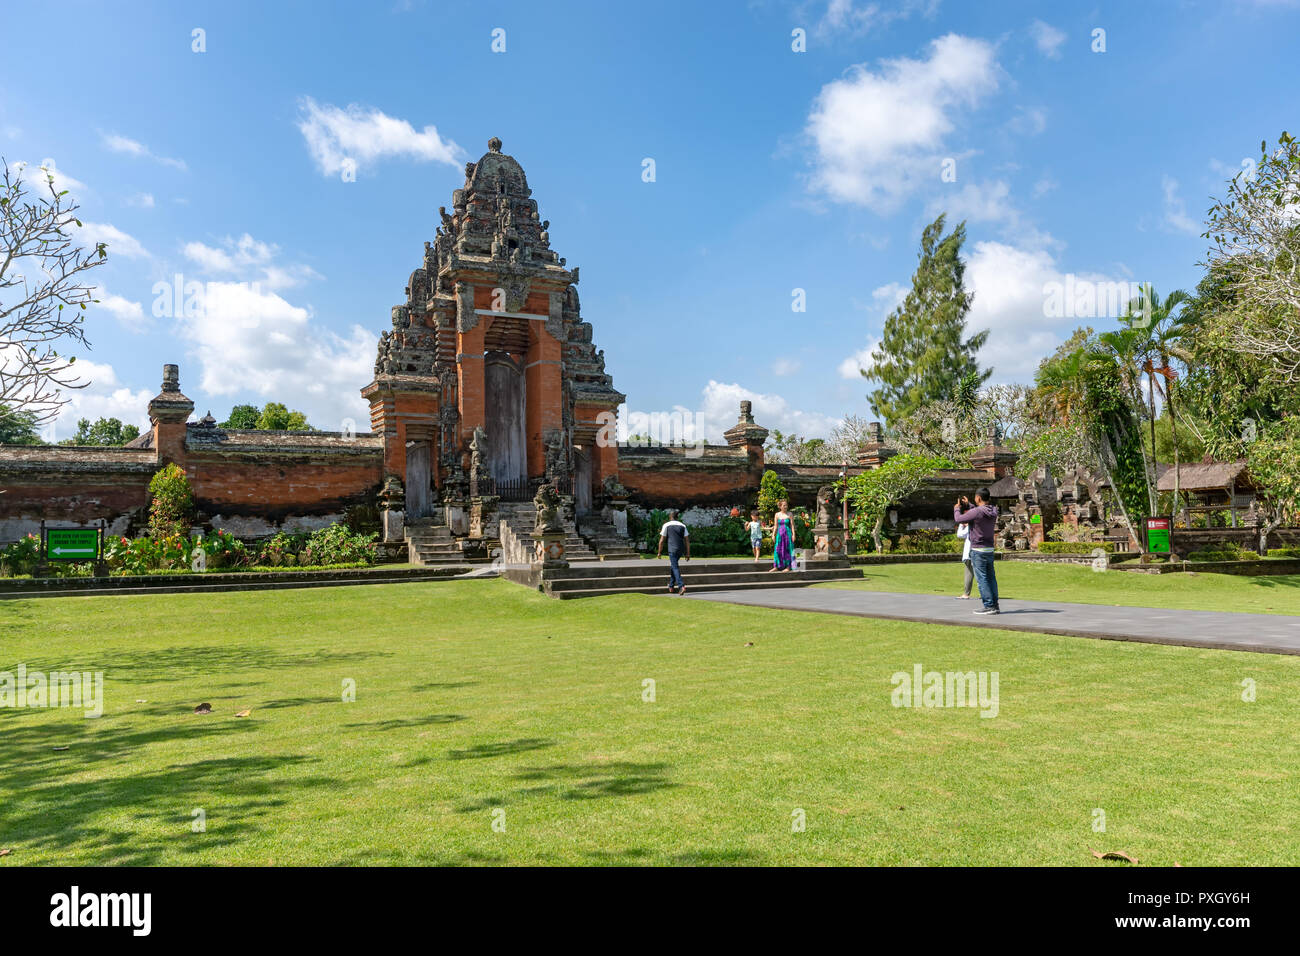 Badung, Indonesia - September 12, 2018: Tourist taking photo at the entrance of Taman Ayun temple, an ancient royal temple of Mengwi Empire. Stock Photo